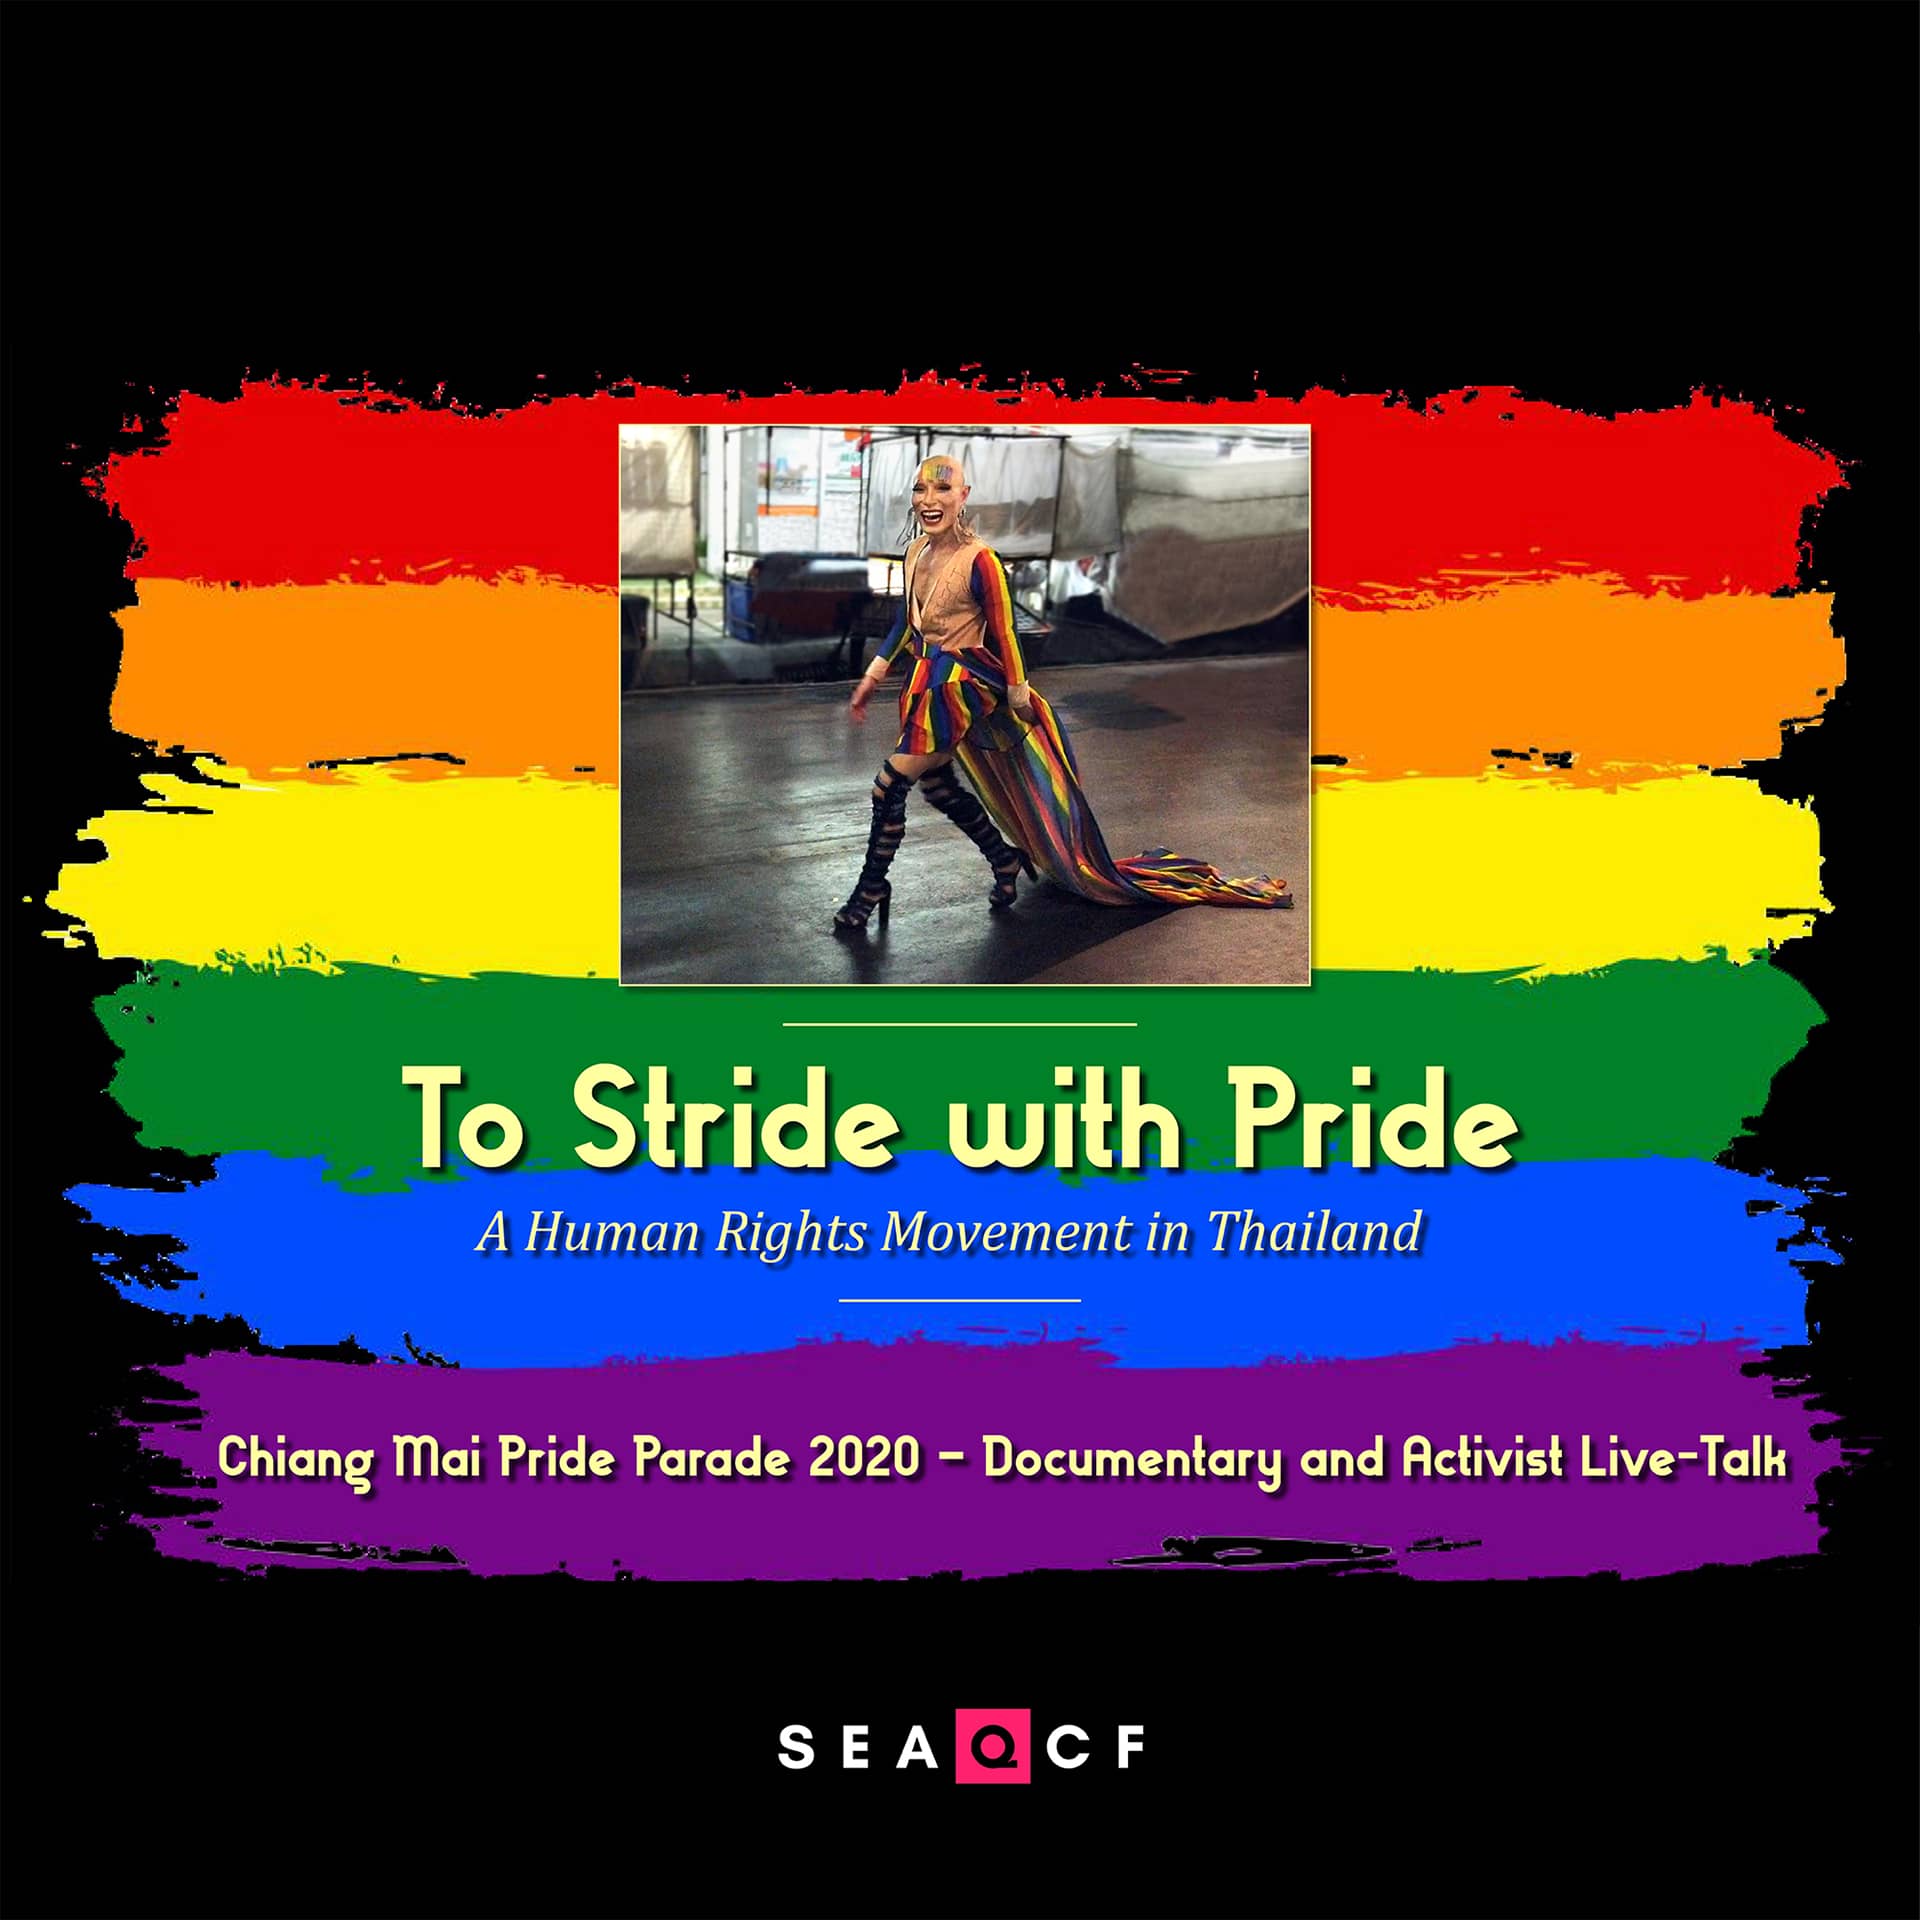 To Stride with Pride Poster, image of a person walking proudly on the street, with a rainbow flag as background